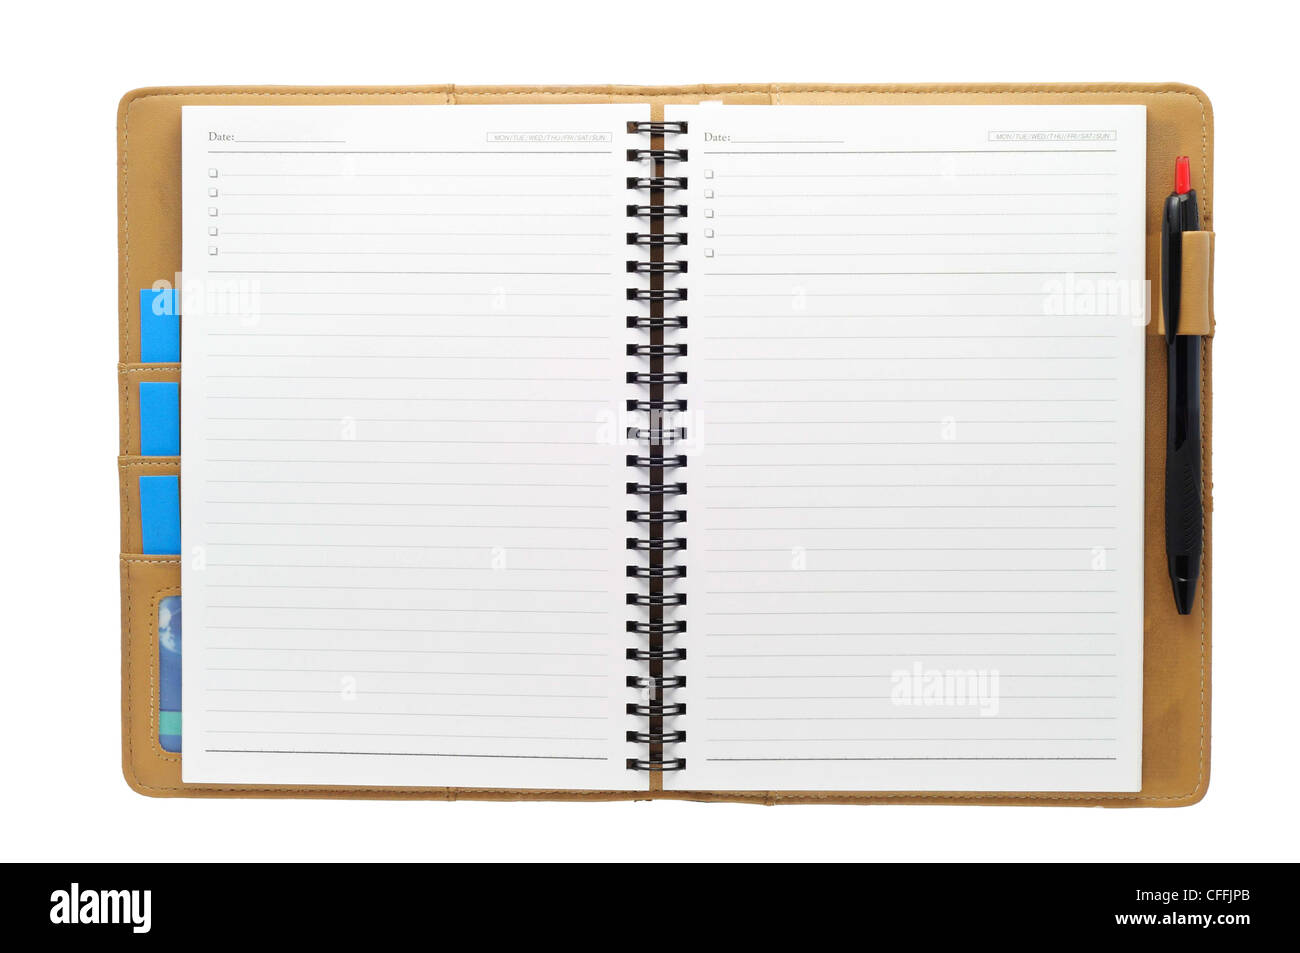 Open blank note book, isolate, on white background Stock Photo